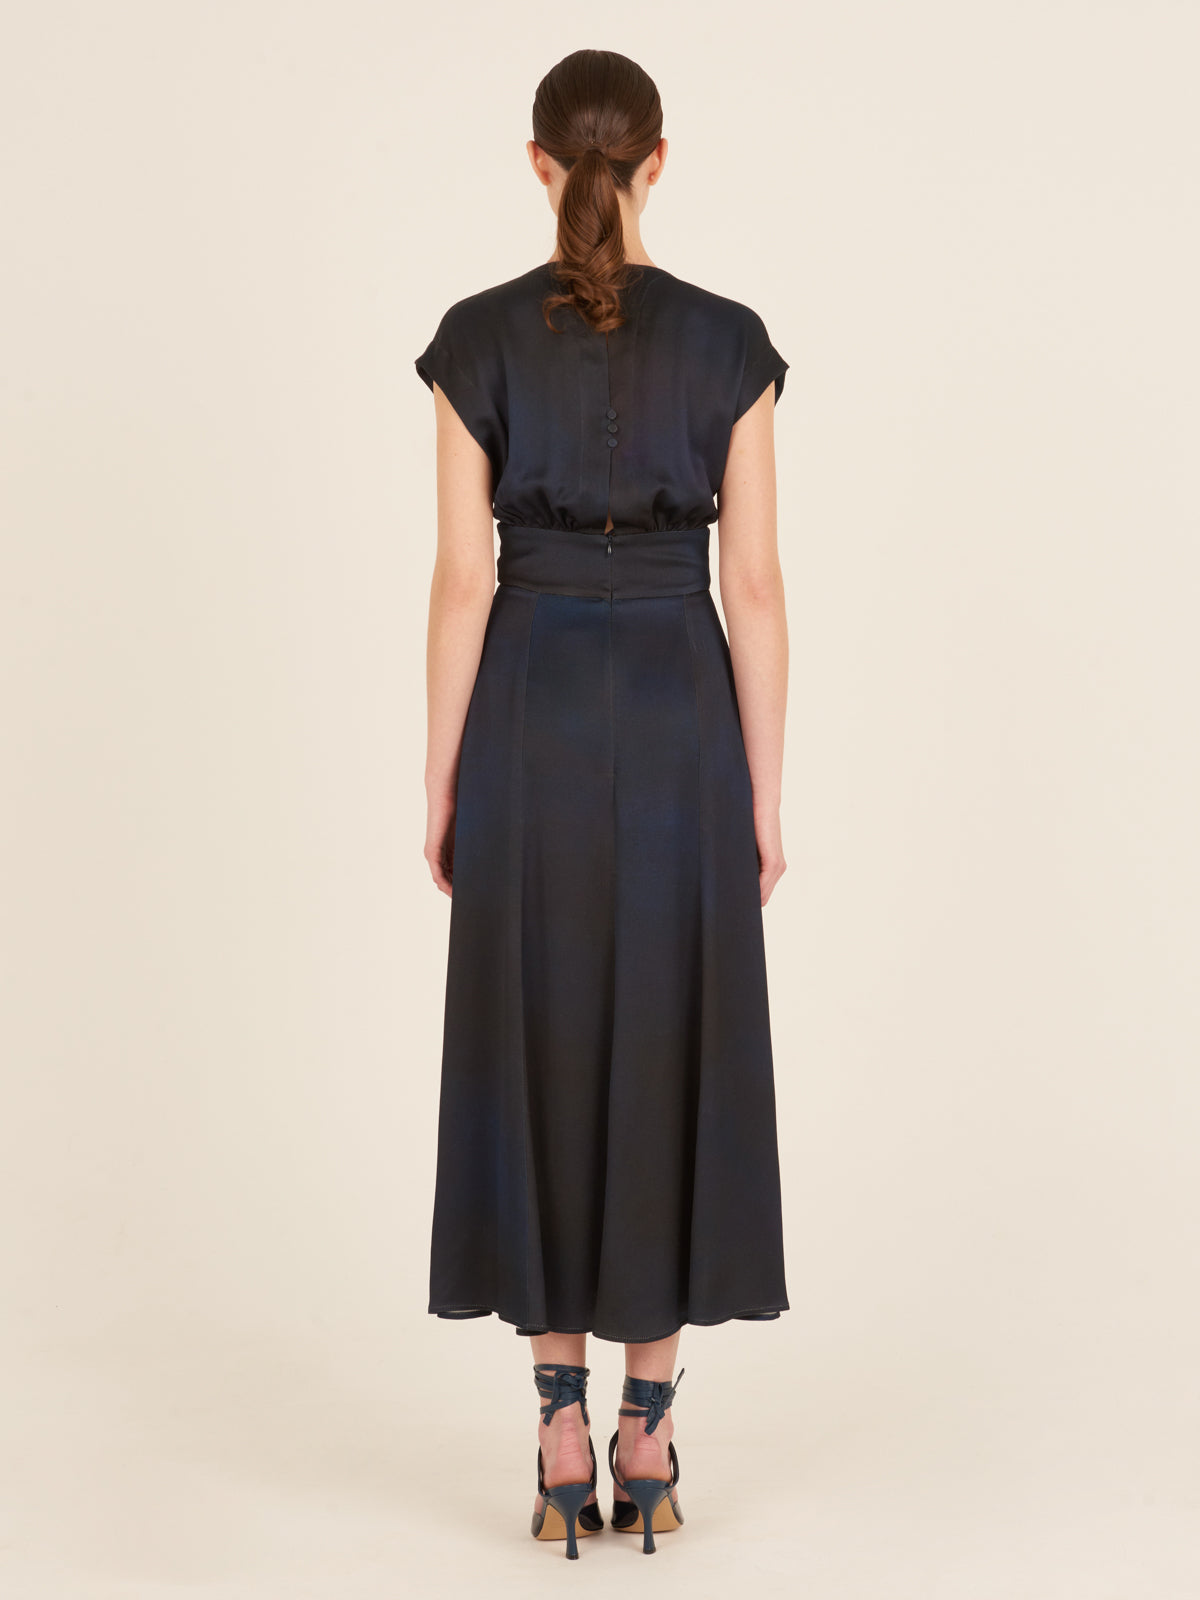 An elegant Emmeline Dress Navy with a buckle on the front.